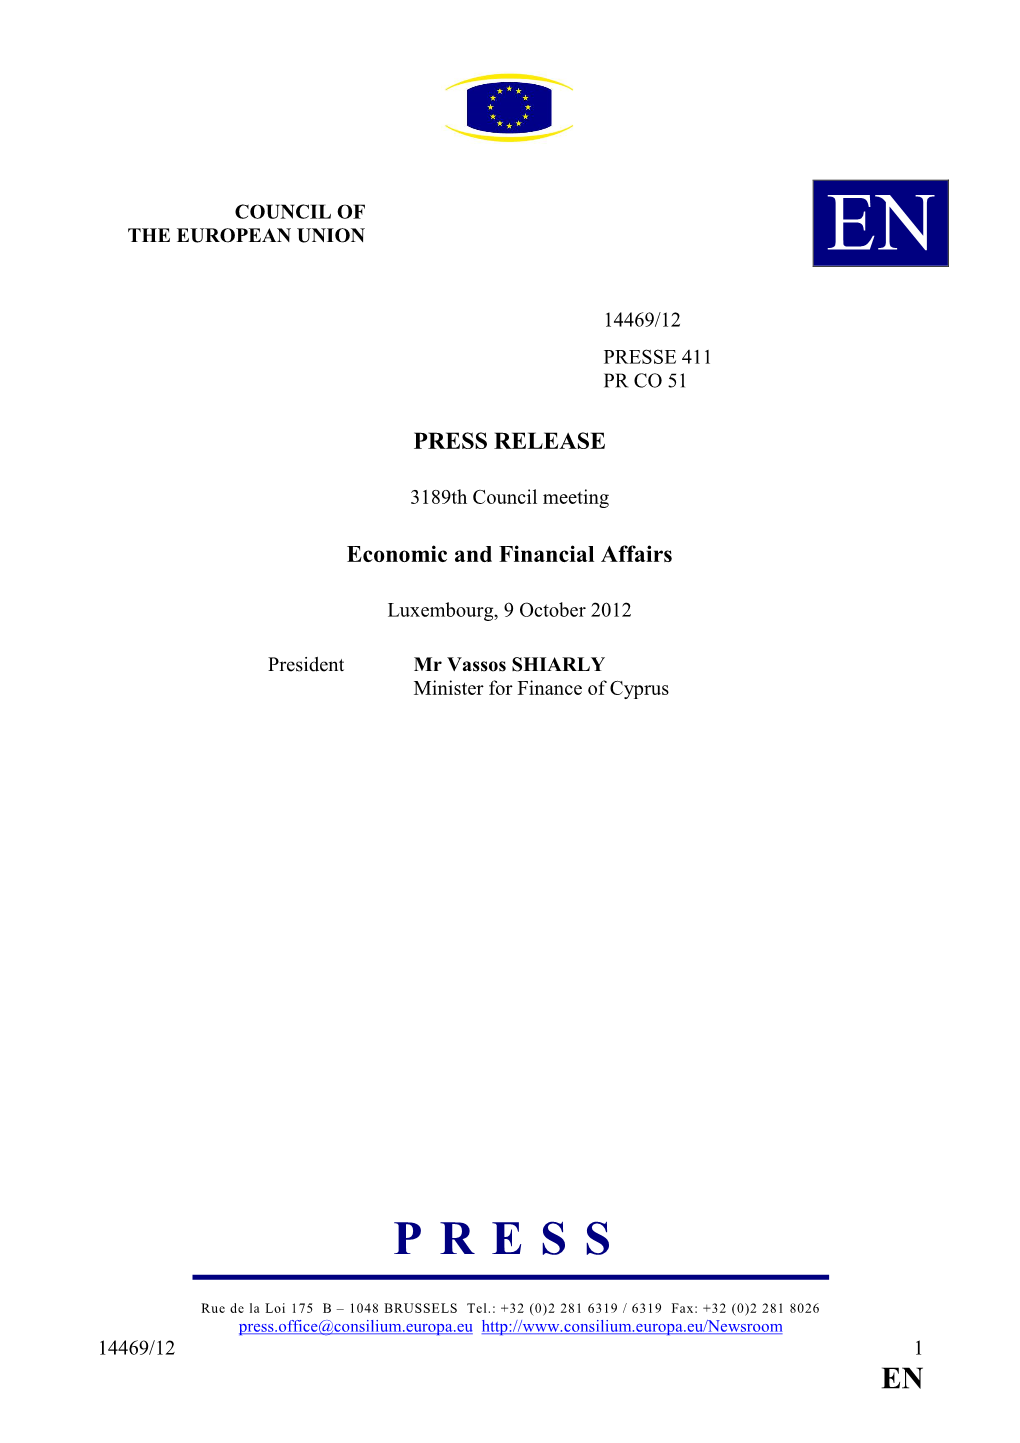 PRESS RELEASE Economic and Financial